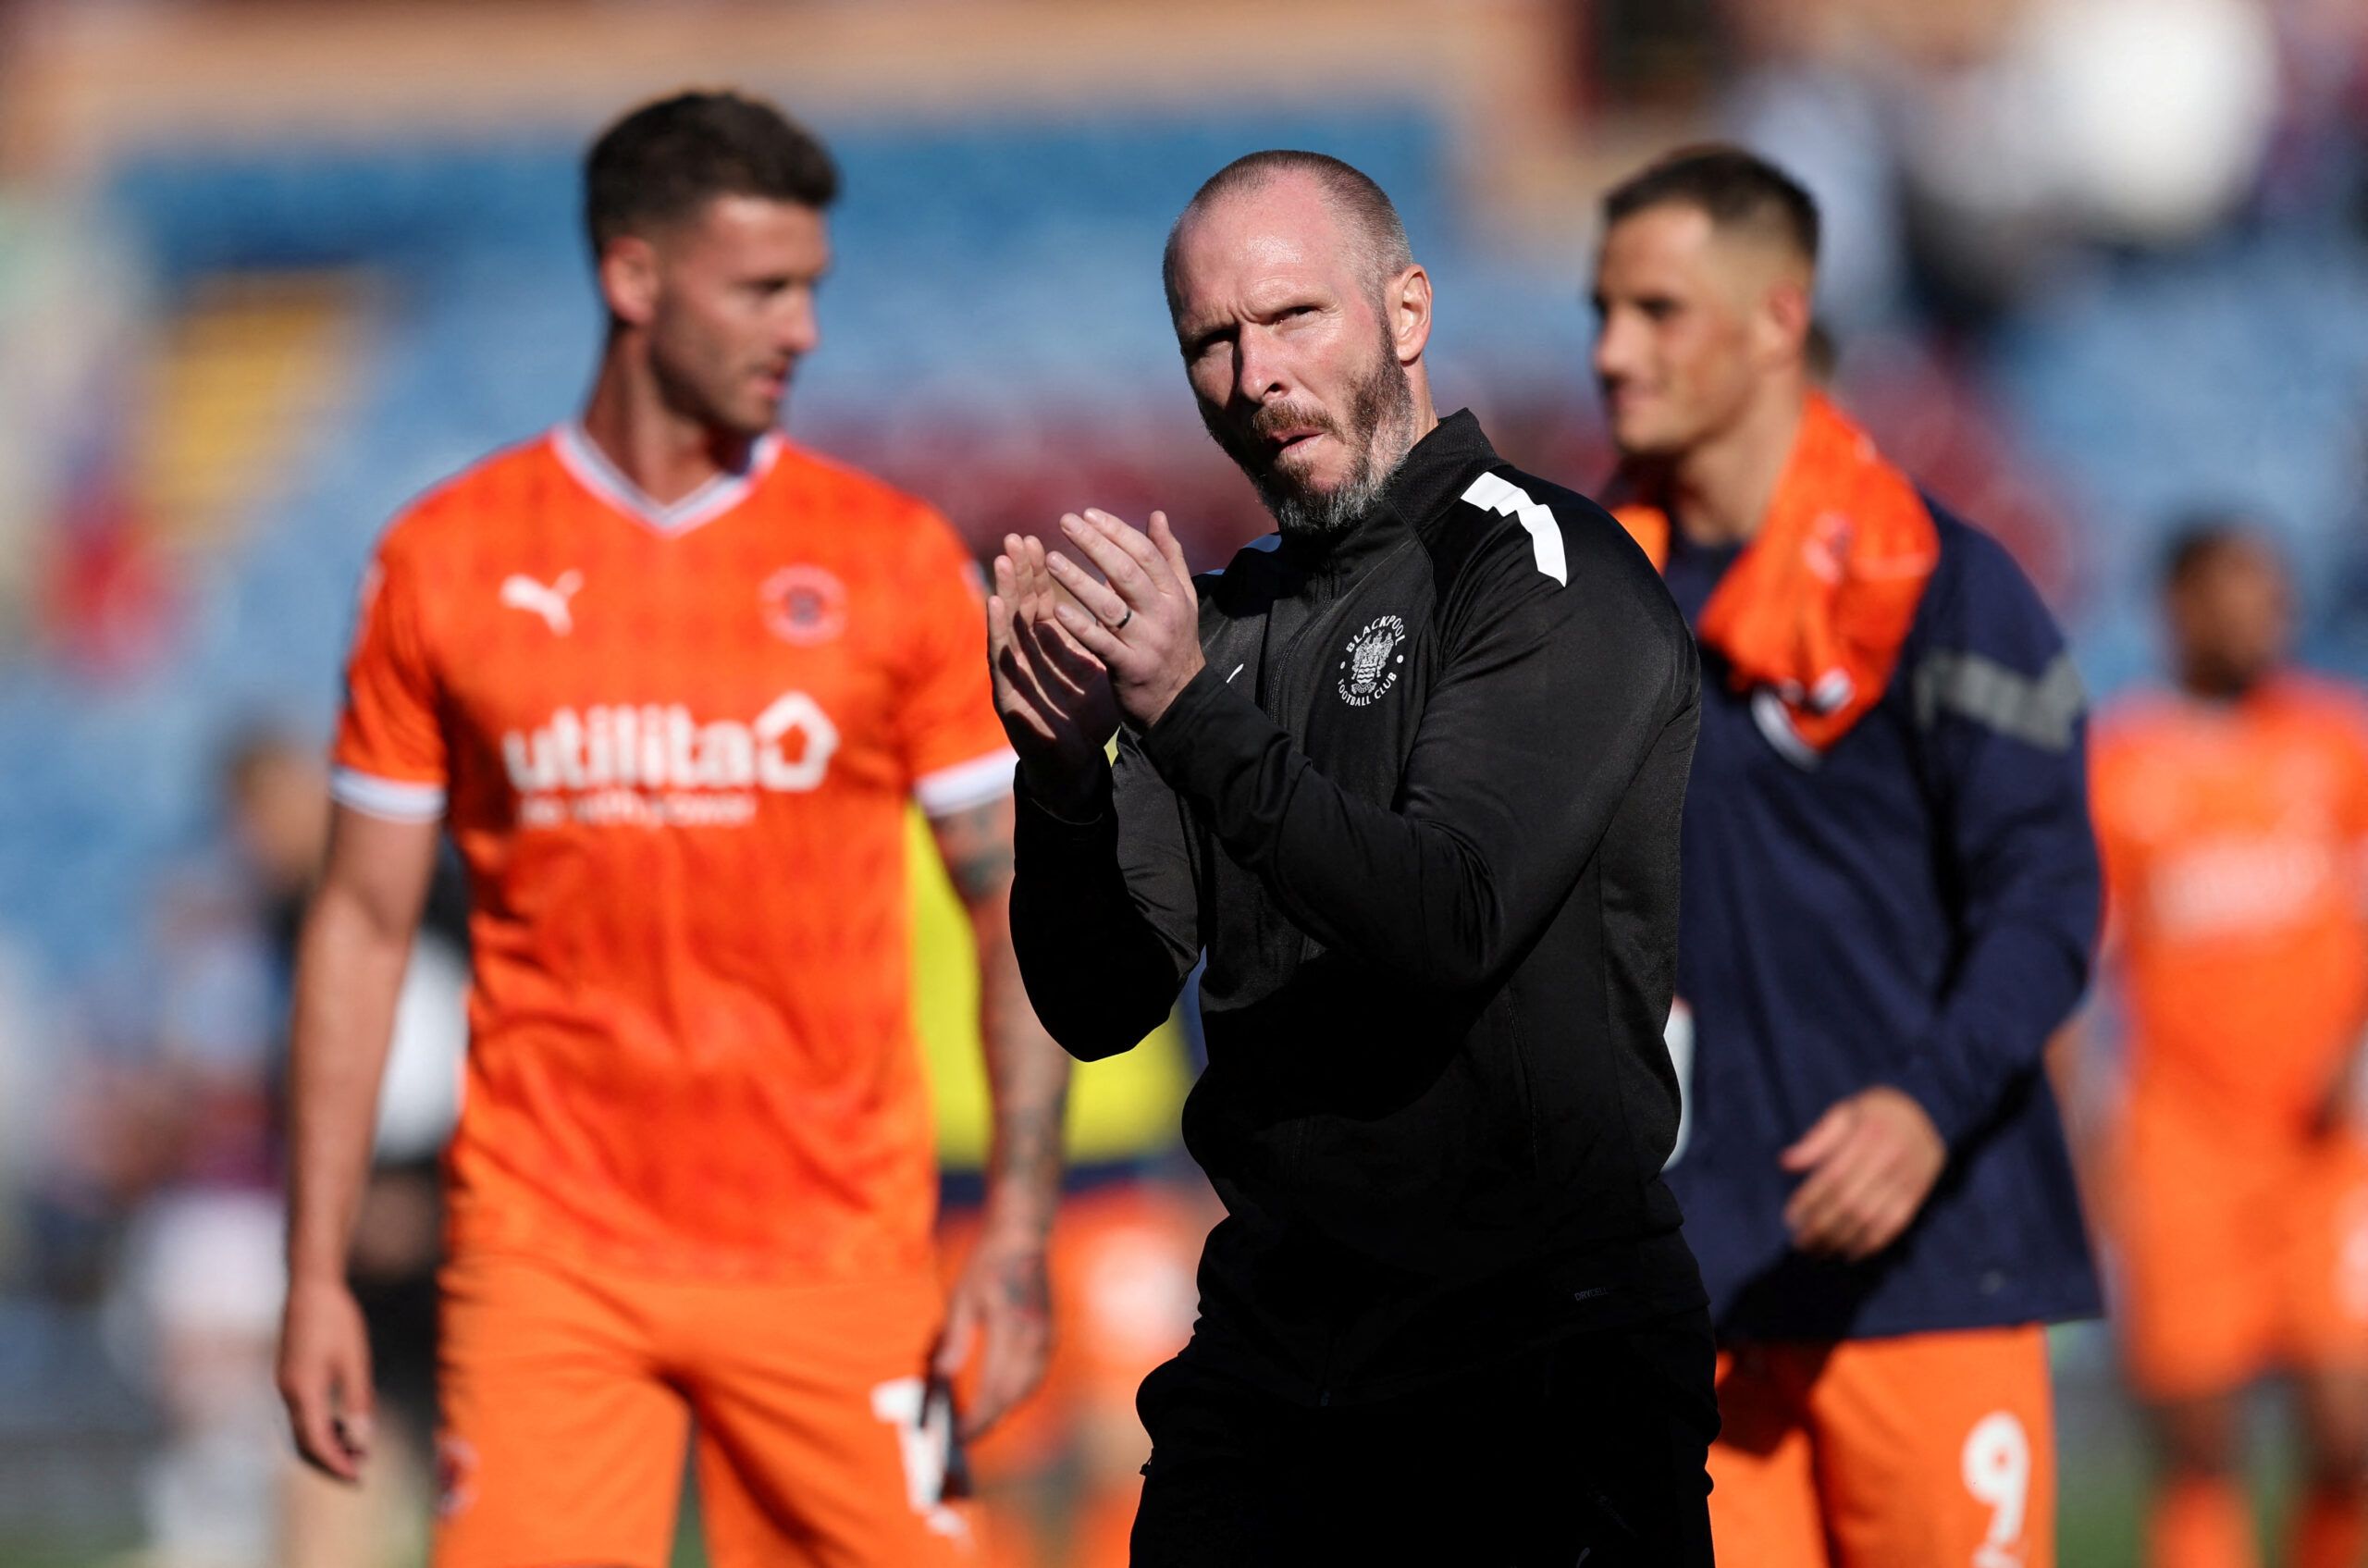 Soccer Football - Championship - Burnley v Blackpool - Turf Moor, Burnley, Britain - August 20, 2022 Blackpool's manager Michael Appleton applauds fans after the match Action Images/John Clifton  EDITORIAL USE ONLY. No use with unauthorized audio, video, data, fixture lists, club/league logos or 